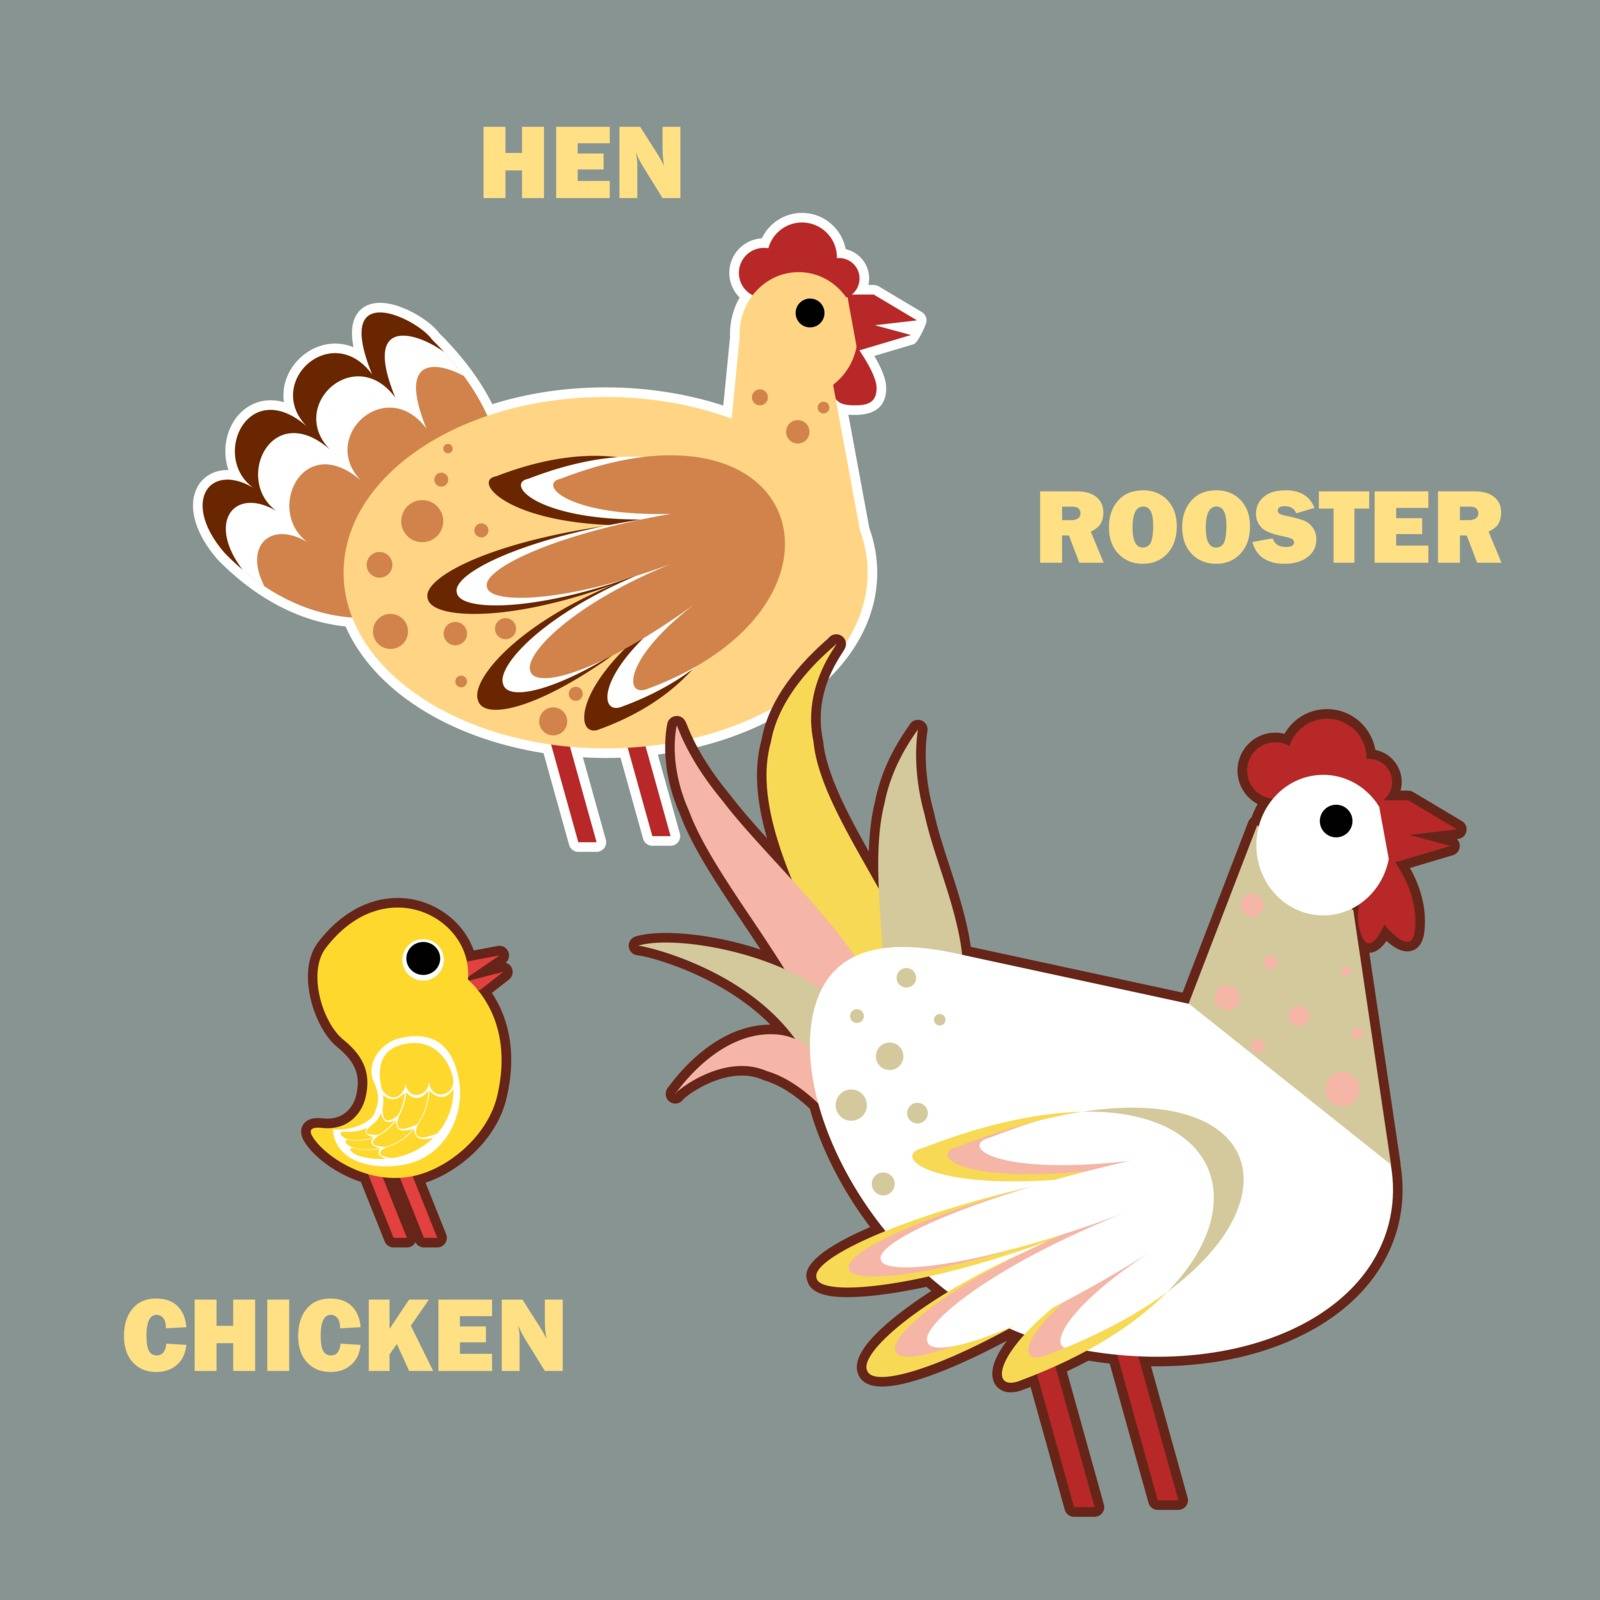 The isolafed Domestic birds rooster, hen and chicken on simple grey background. Educational flashcard for teaching preschool in kindergarten. Colorful flat cartoon style illustration.